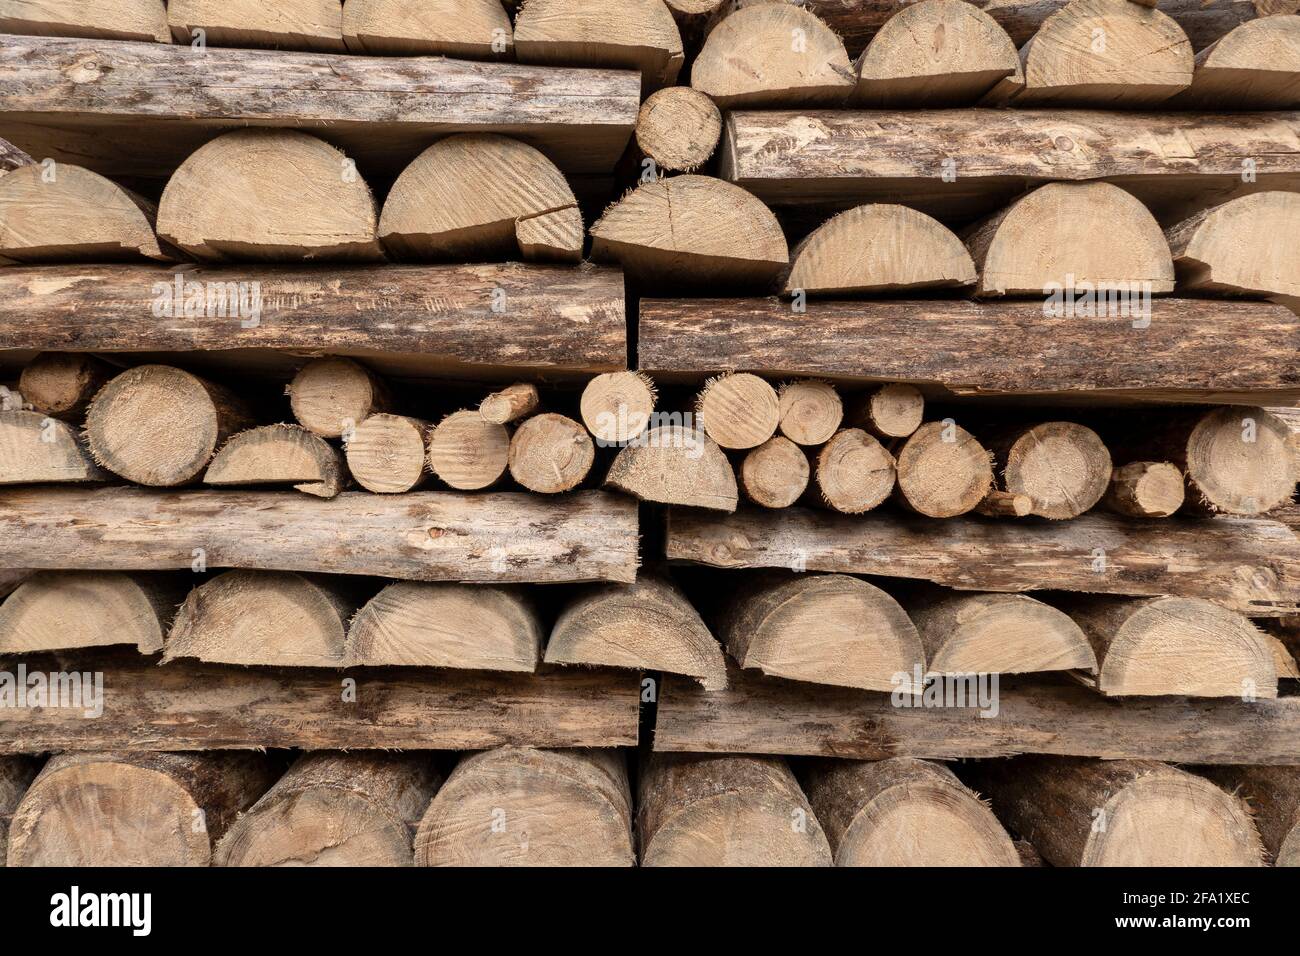 Detail of a woodpile, mostly made of halved tree trunks Stock Photo